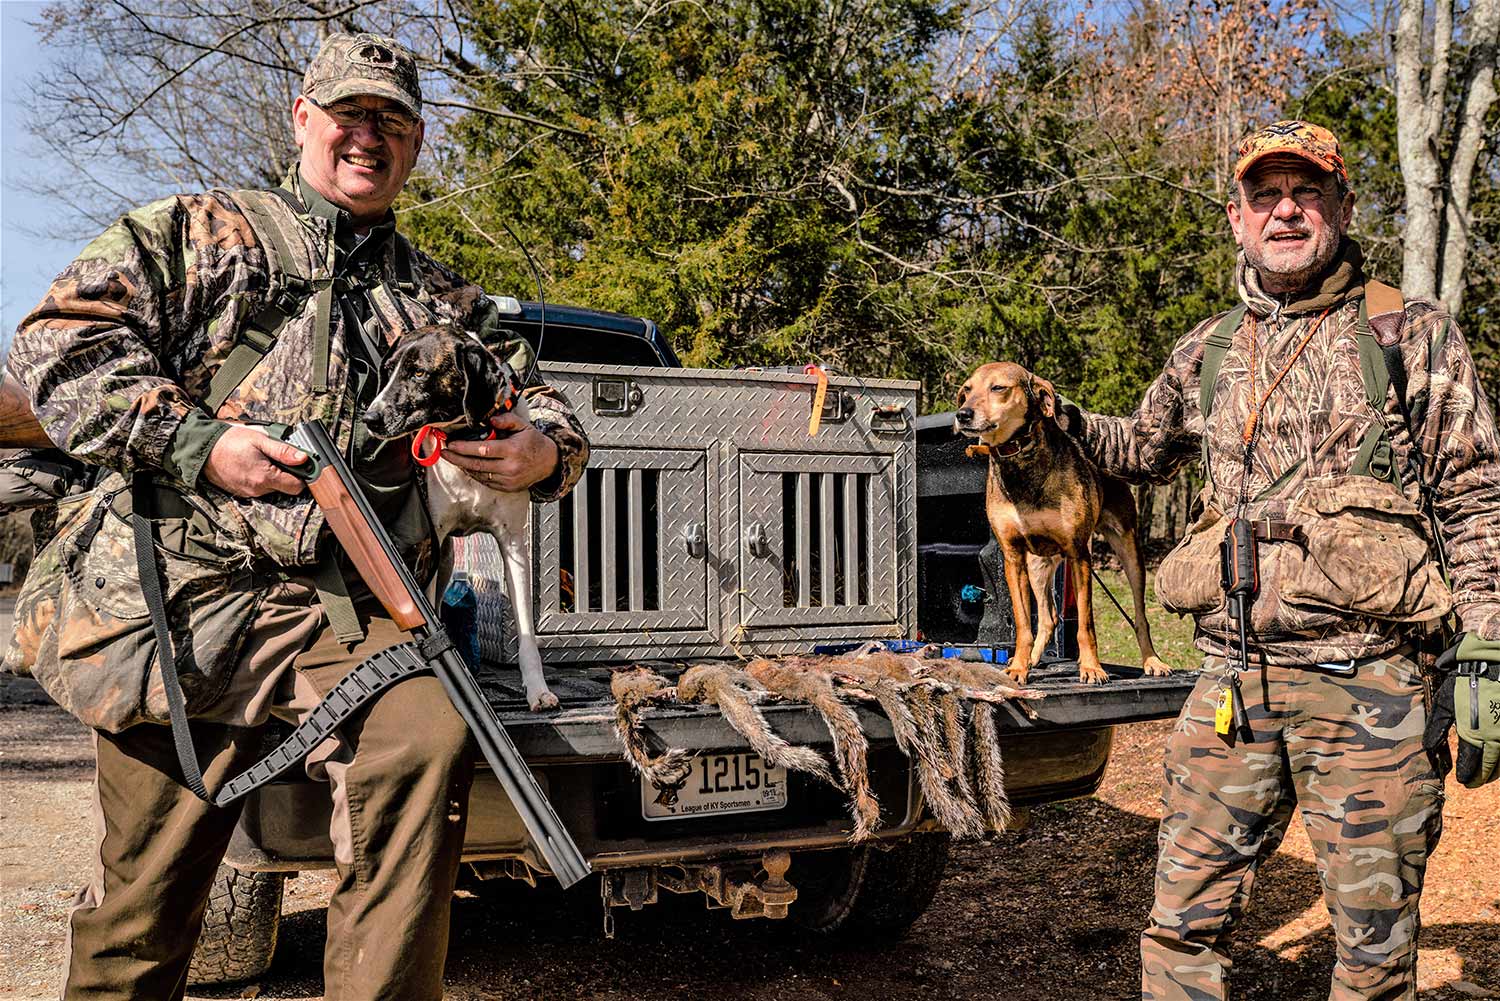 Two hunters standing next to a truck with a hunting dog on the tailgate.